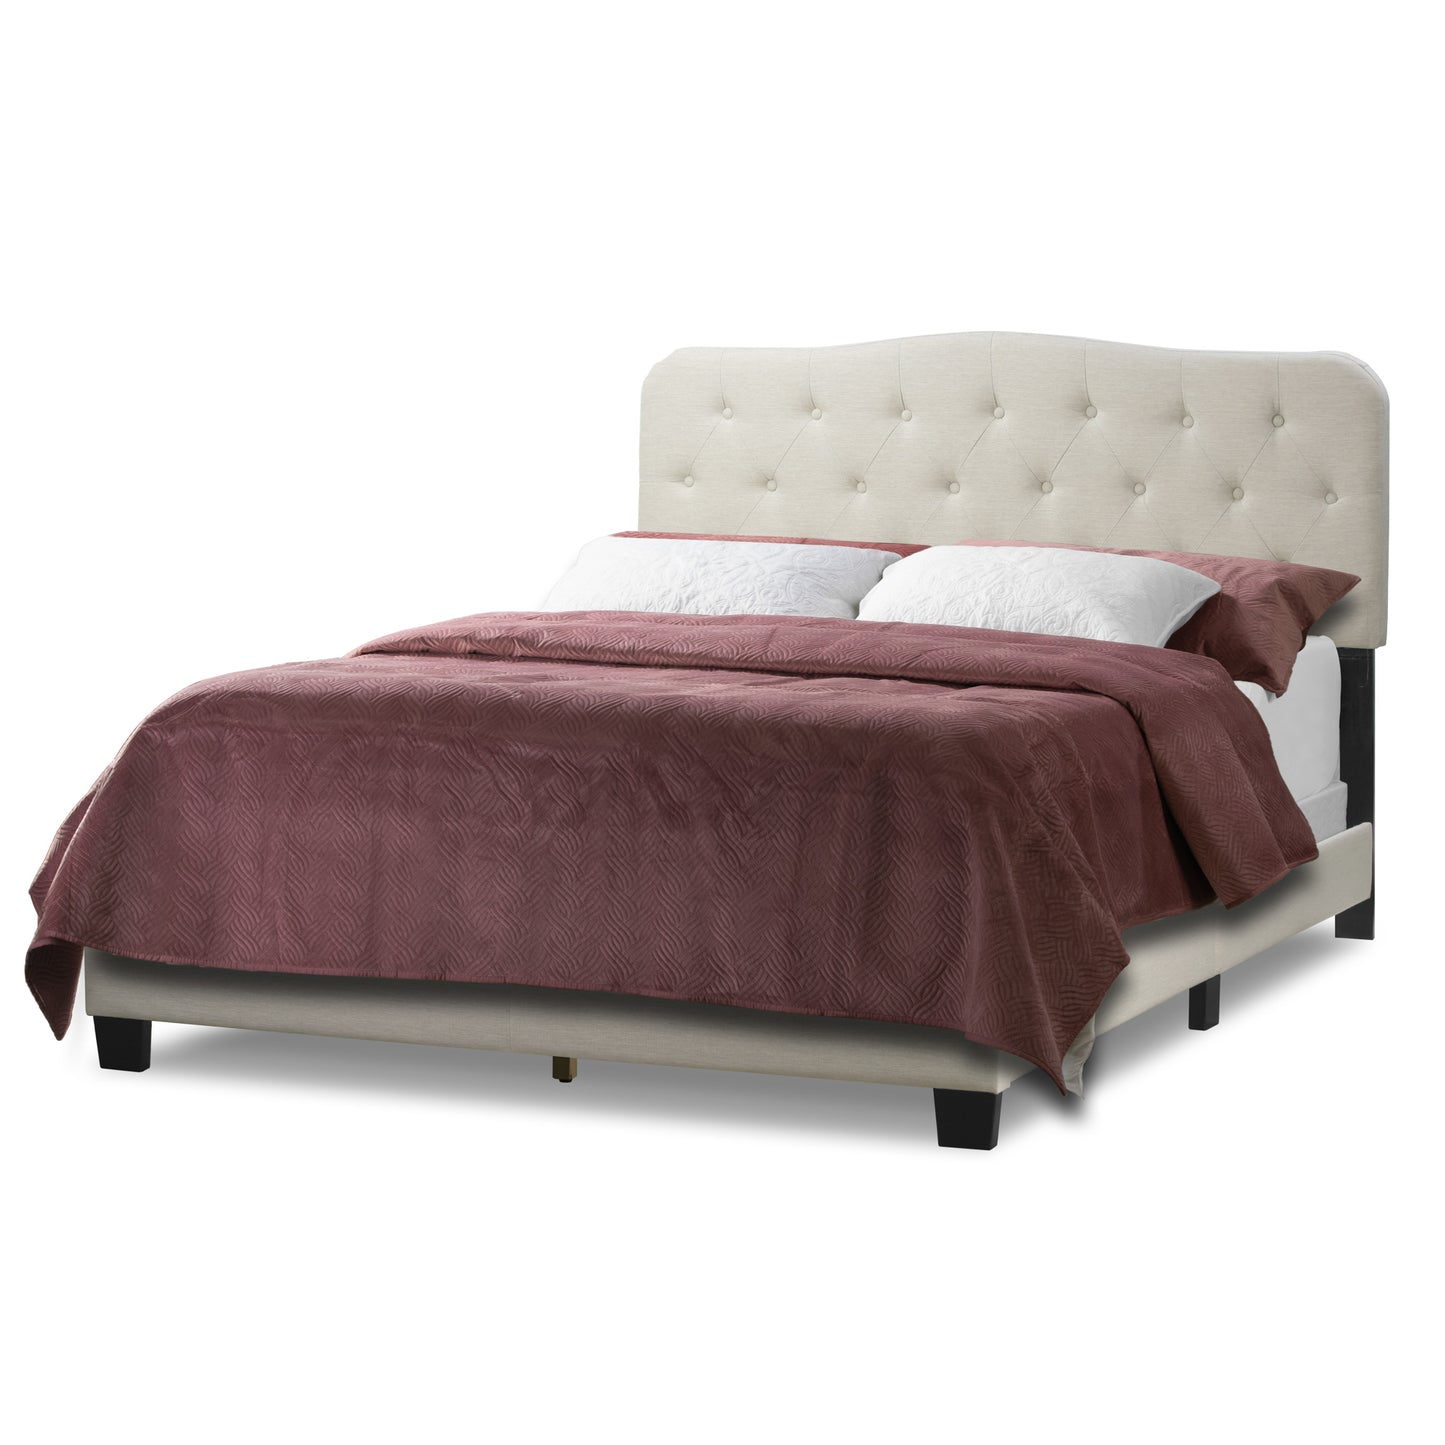 Artan Beige Fabric Queen Bed with Button Tufting